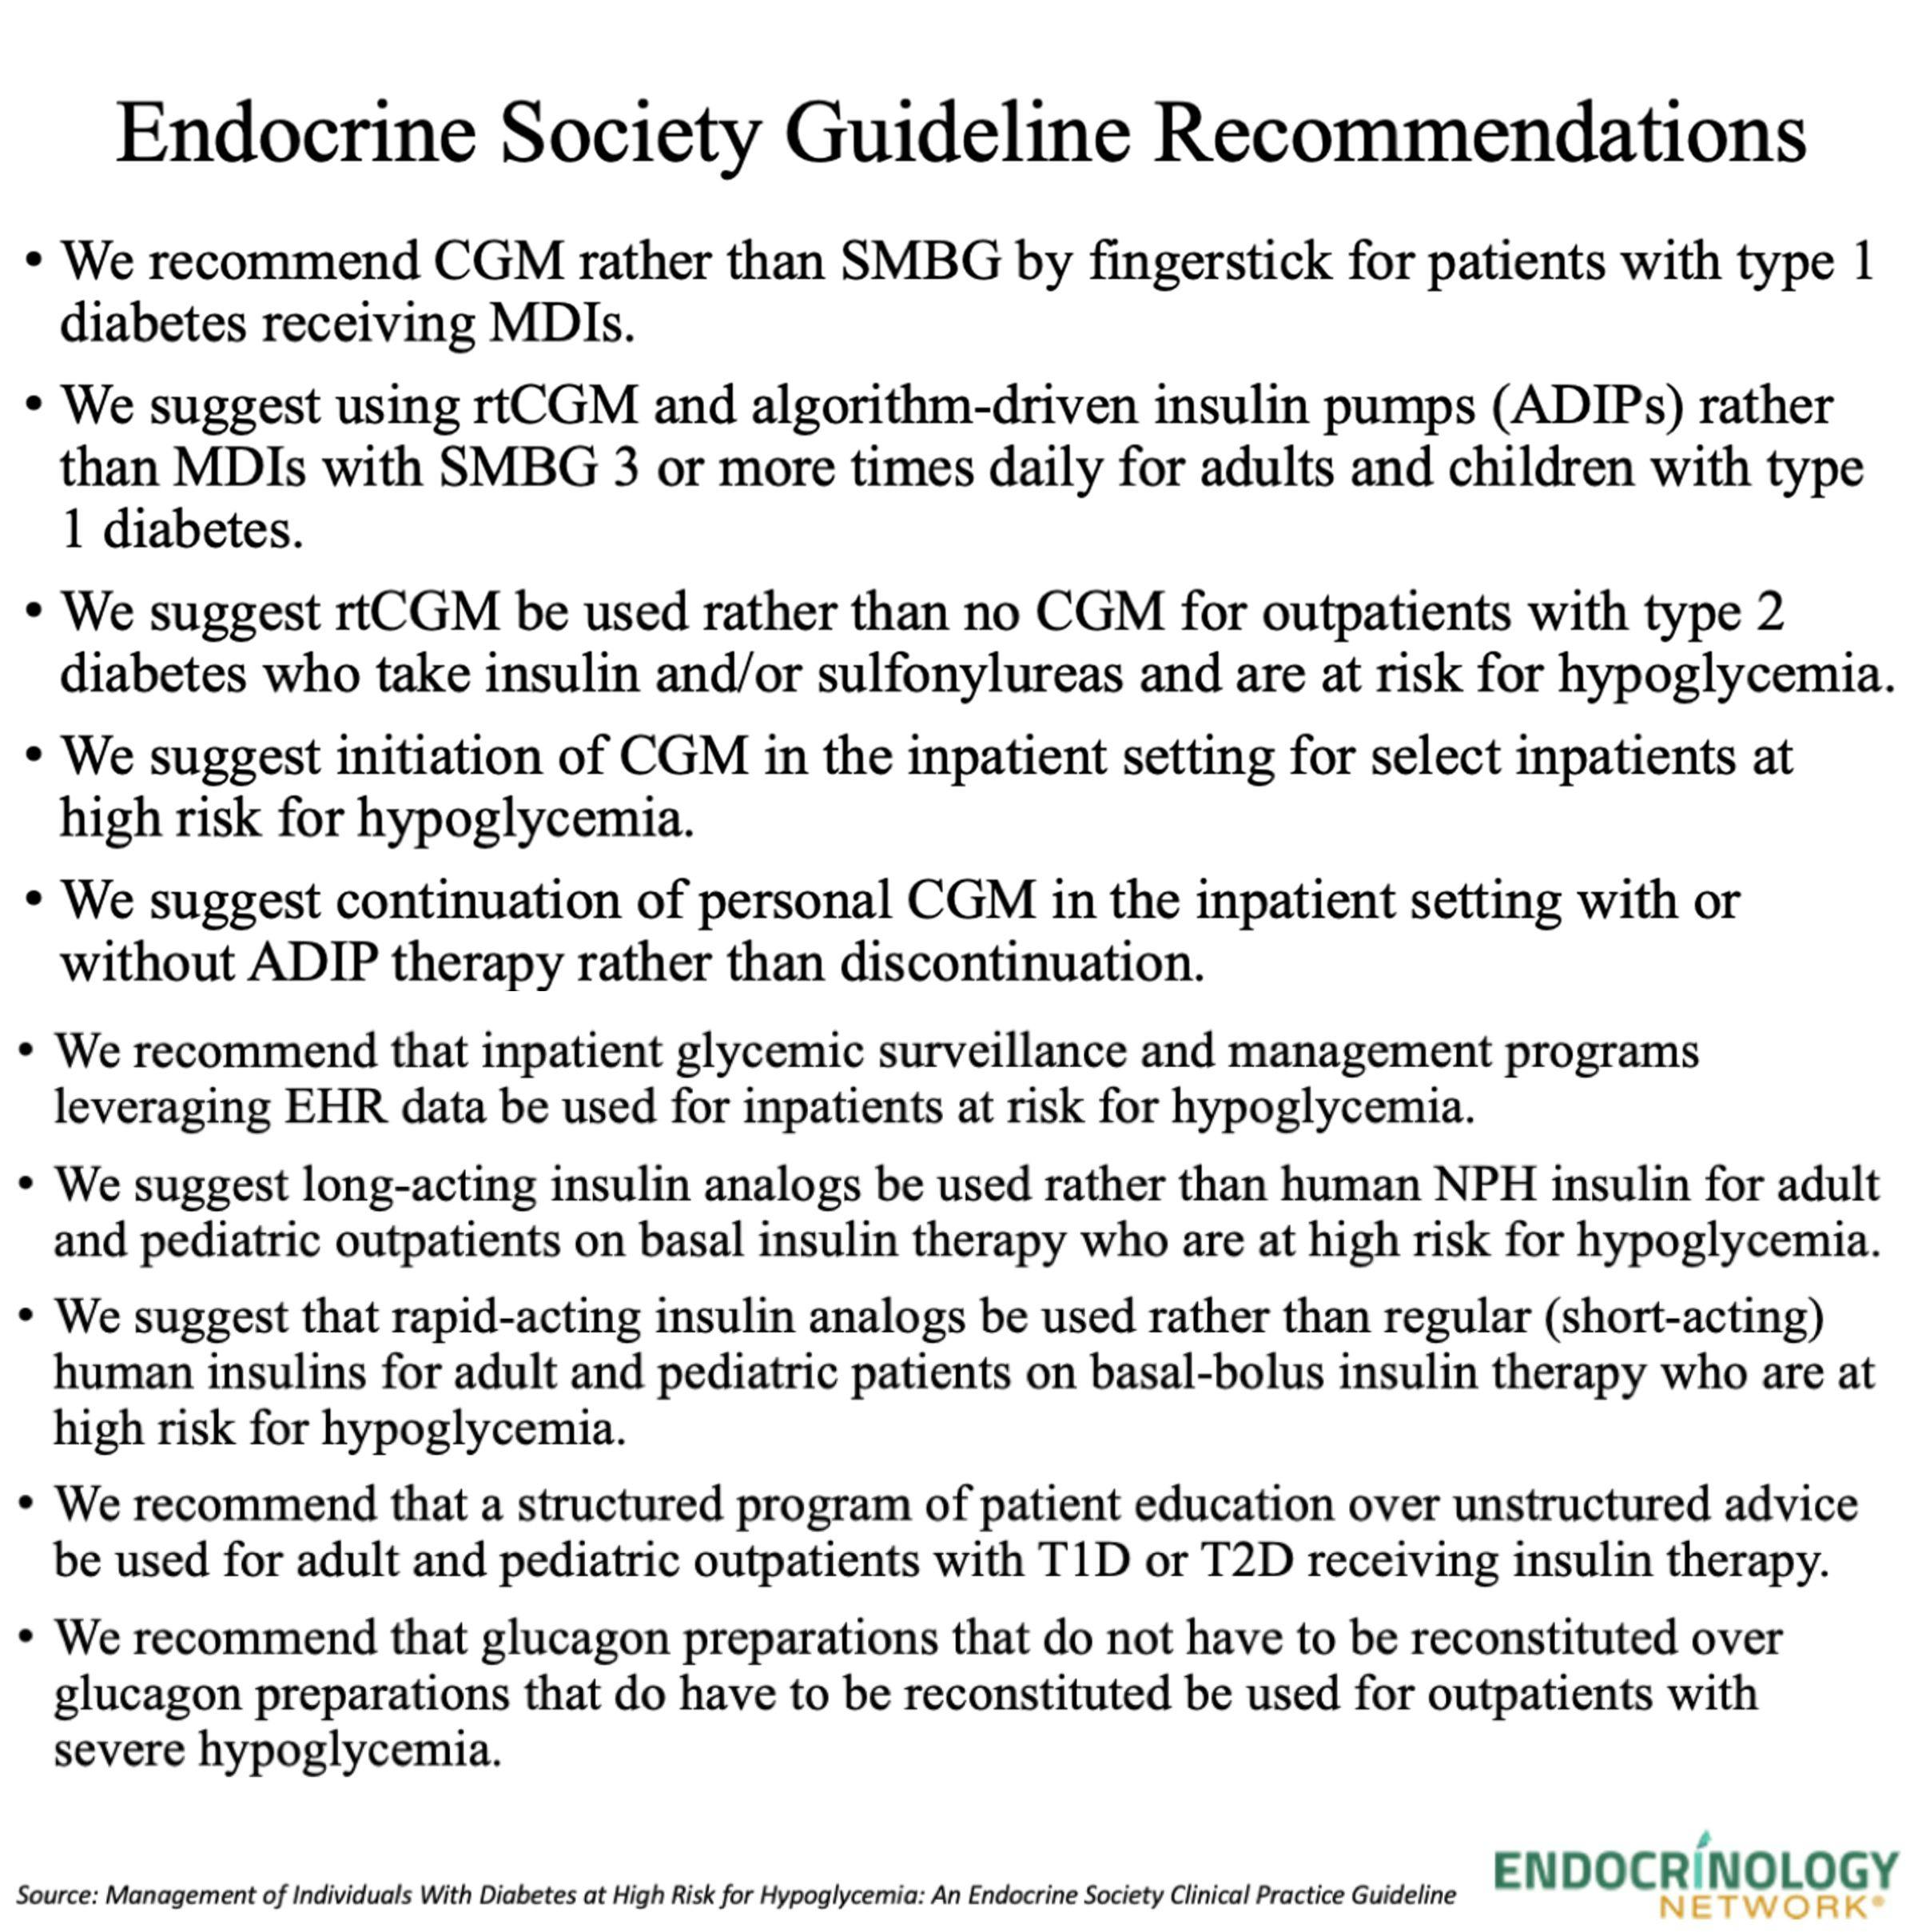 The Endocrine Society recommendations for management of hypoglycemia